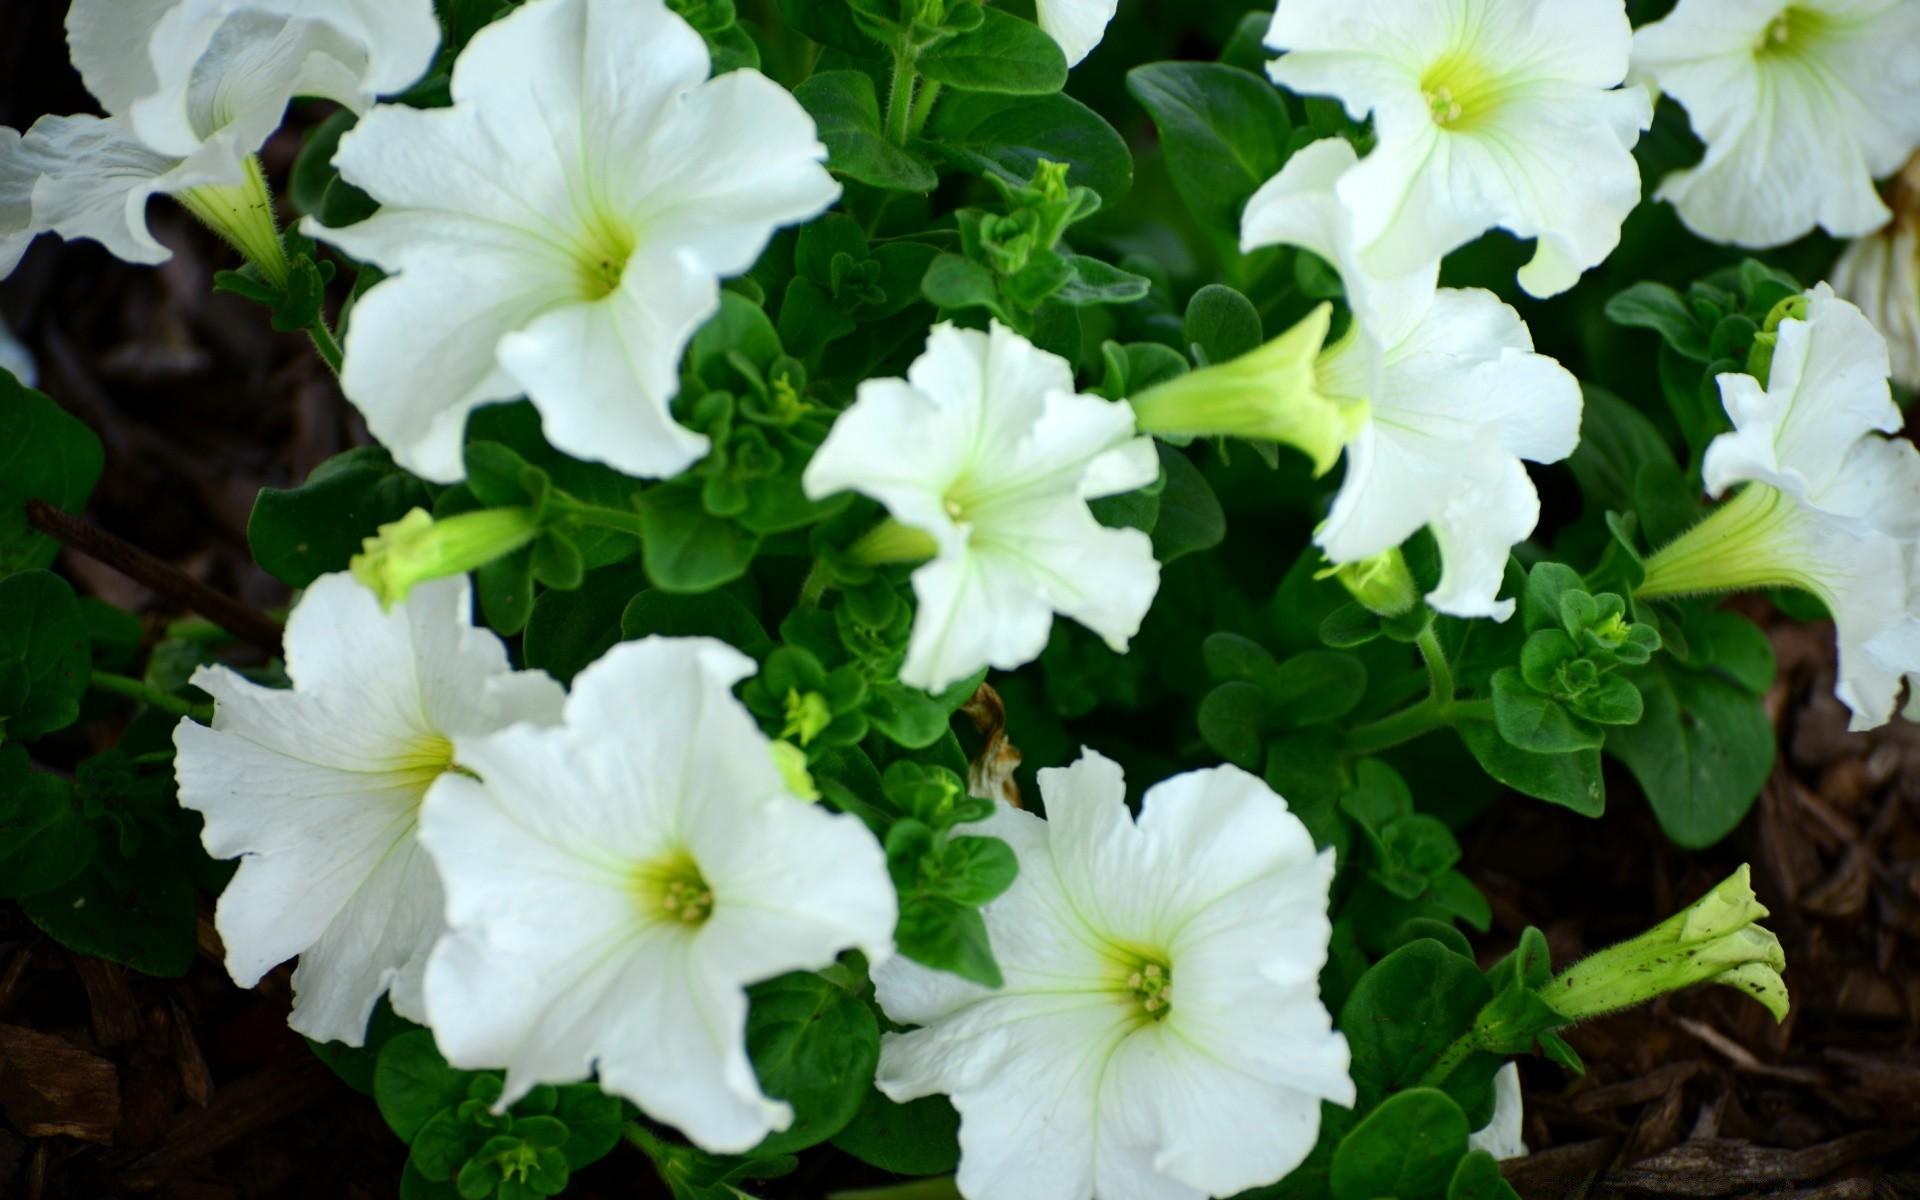 Petunias. Android wallpaper for free